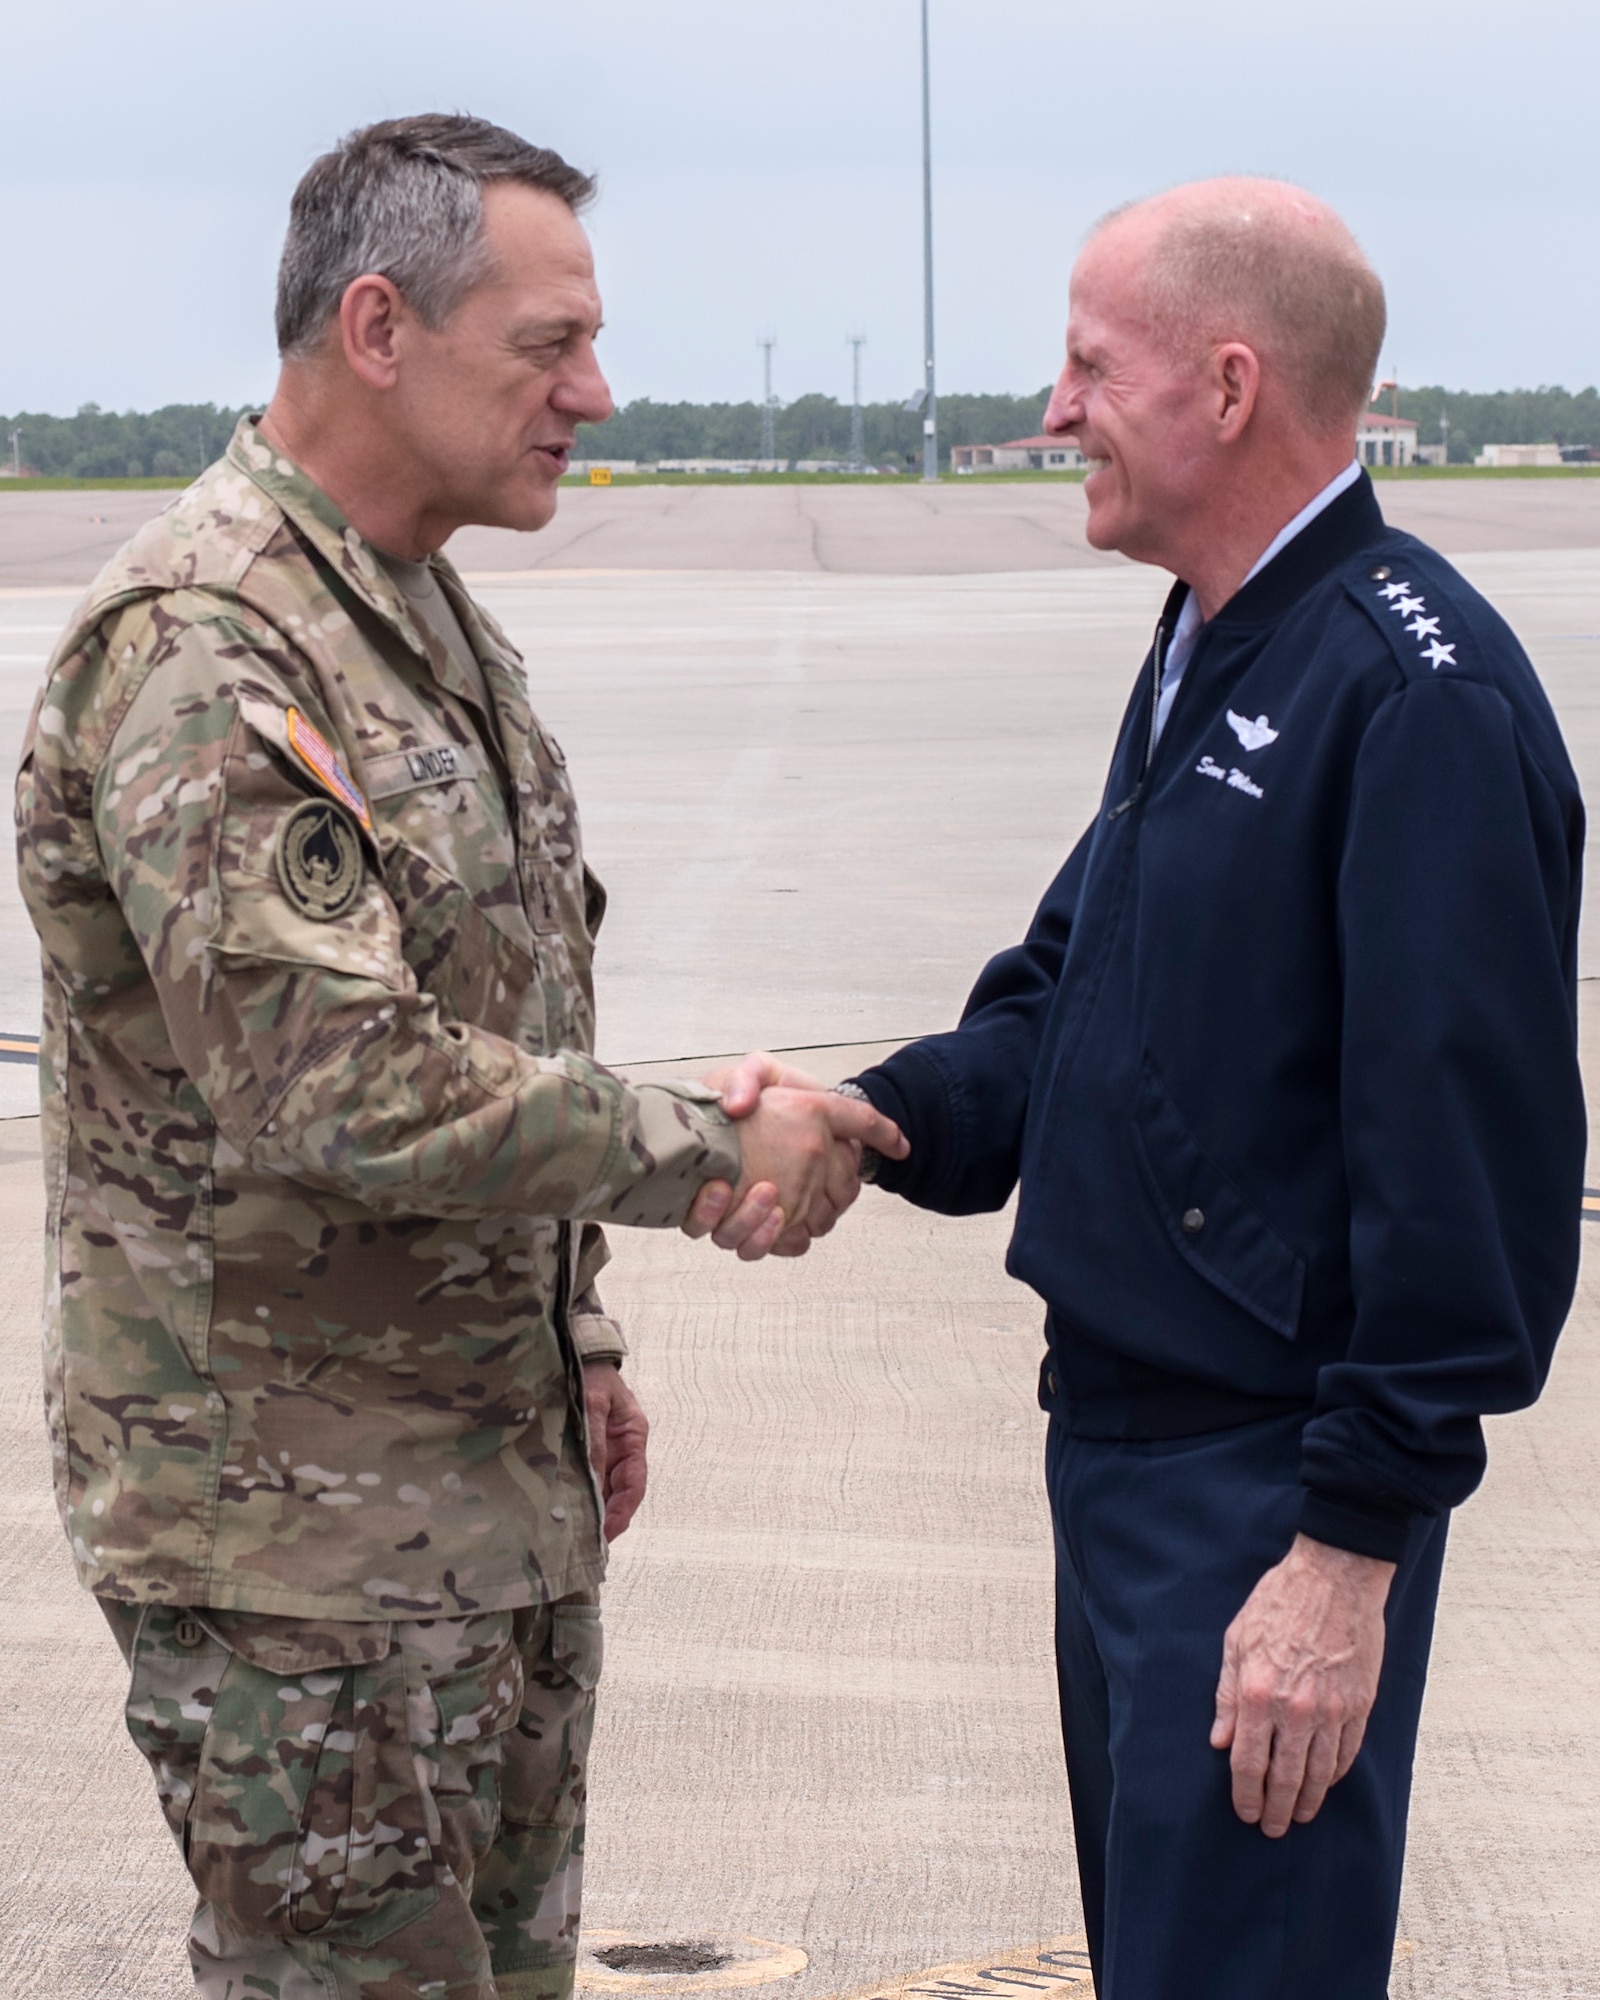 U.S. Army Maj. Gen. James B. Linder, United States Special Operations Command Chief of Staff, greets U.S. Air Force Gen. Stephen W. Wilson, Vice Chief of Staff of the U.S. Air Force, at MacDill Air Force Base, Fla., June 22, 2019.